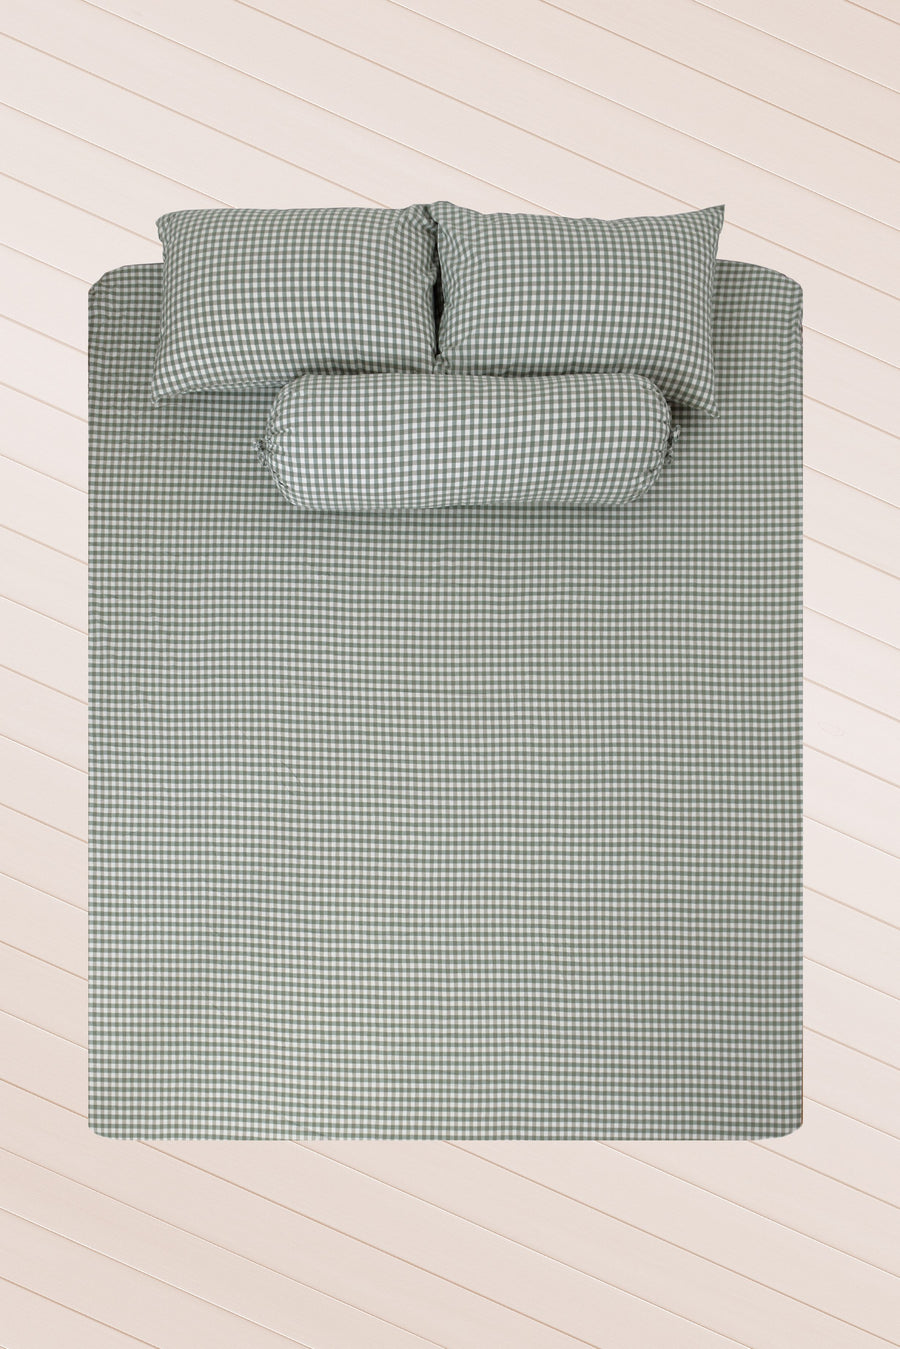 Elly Gingham K 4-pc Fitted Sheet Set (Dark Green)